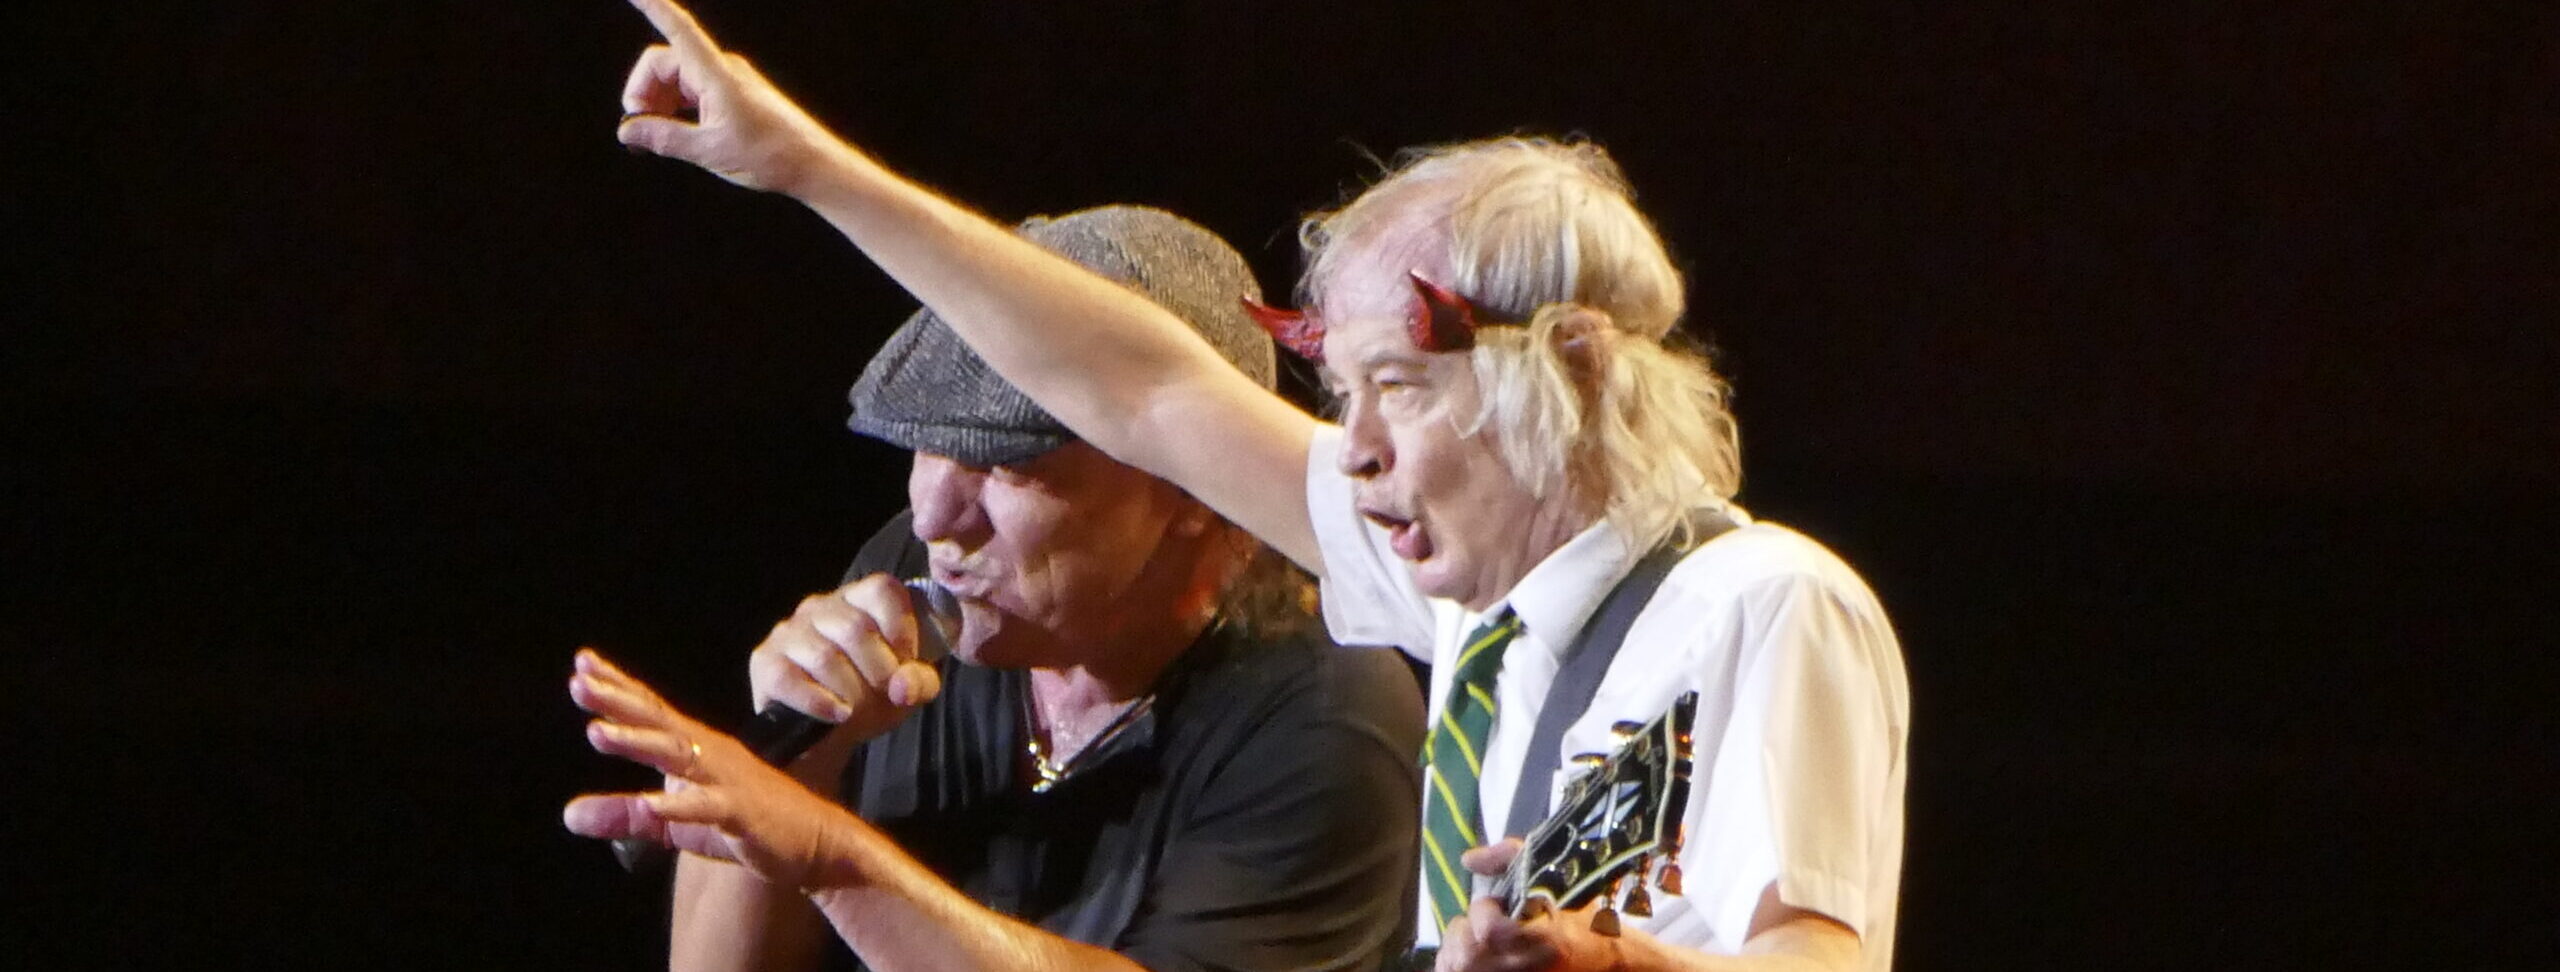 Gig review: AC/DC + The Pretty Reckless at Veltins Arena, Gelsenkirchen